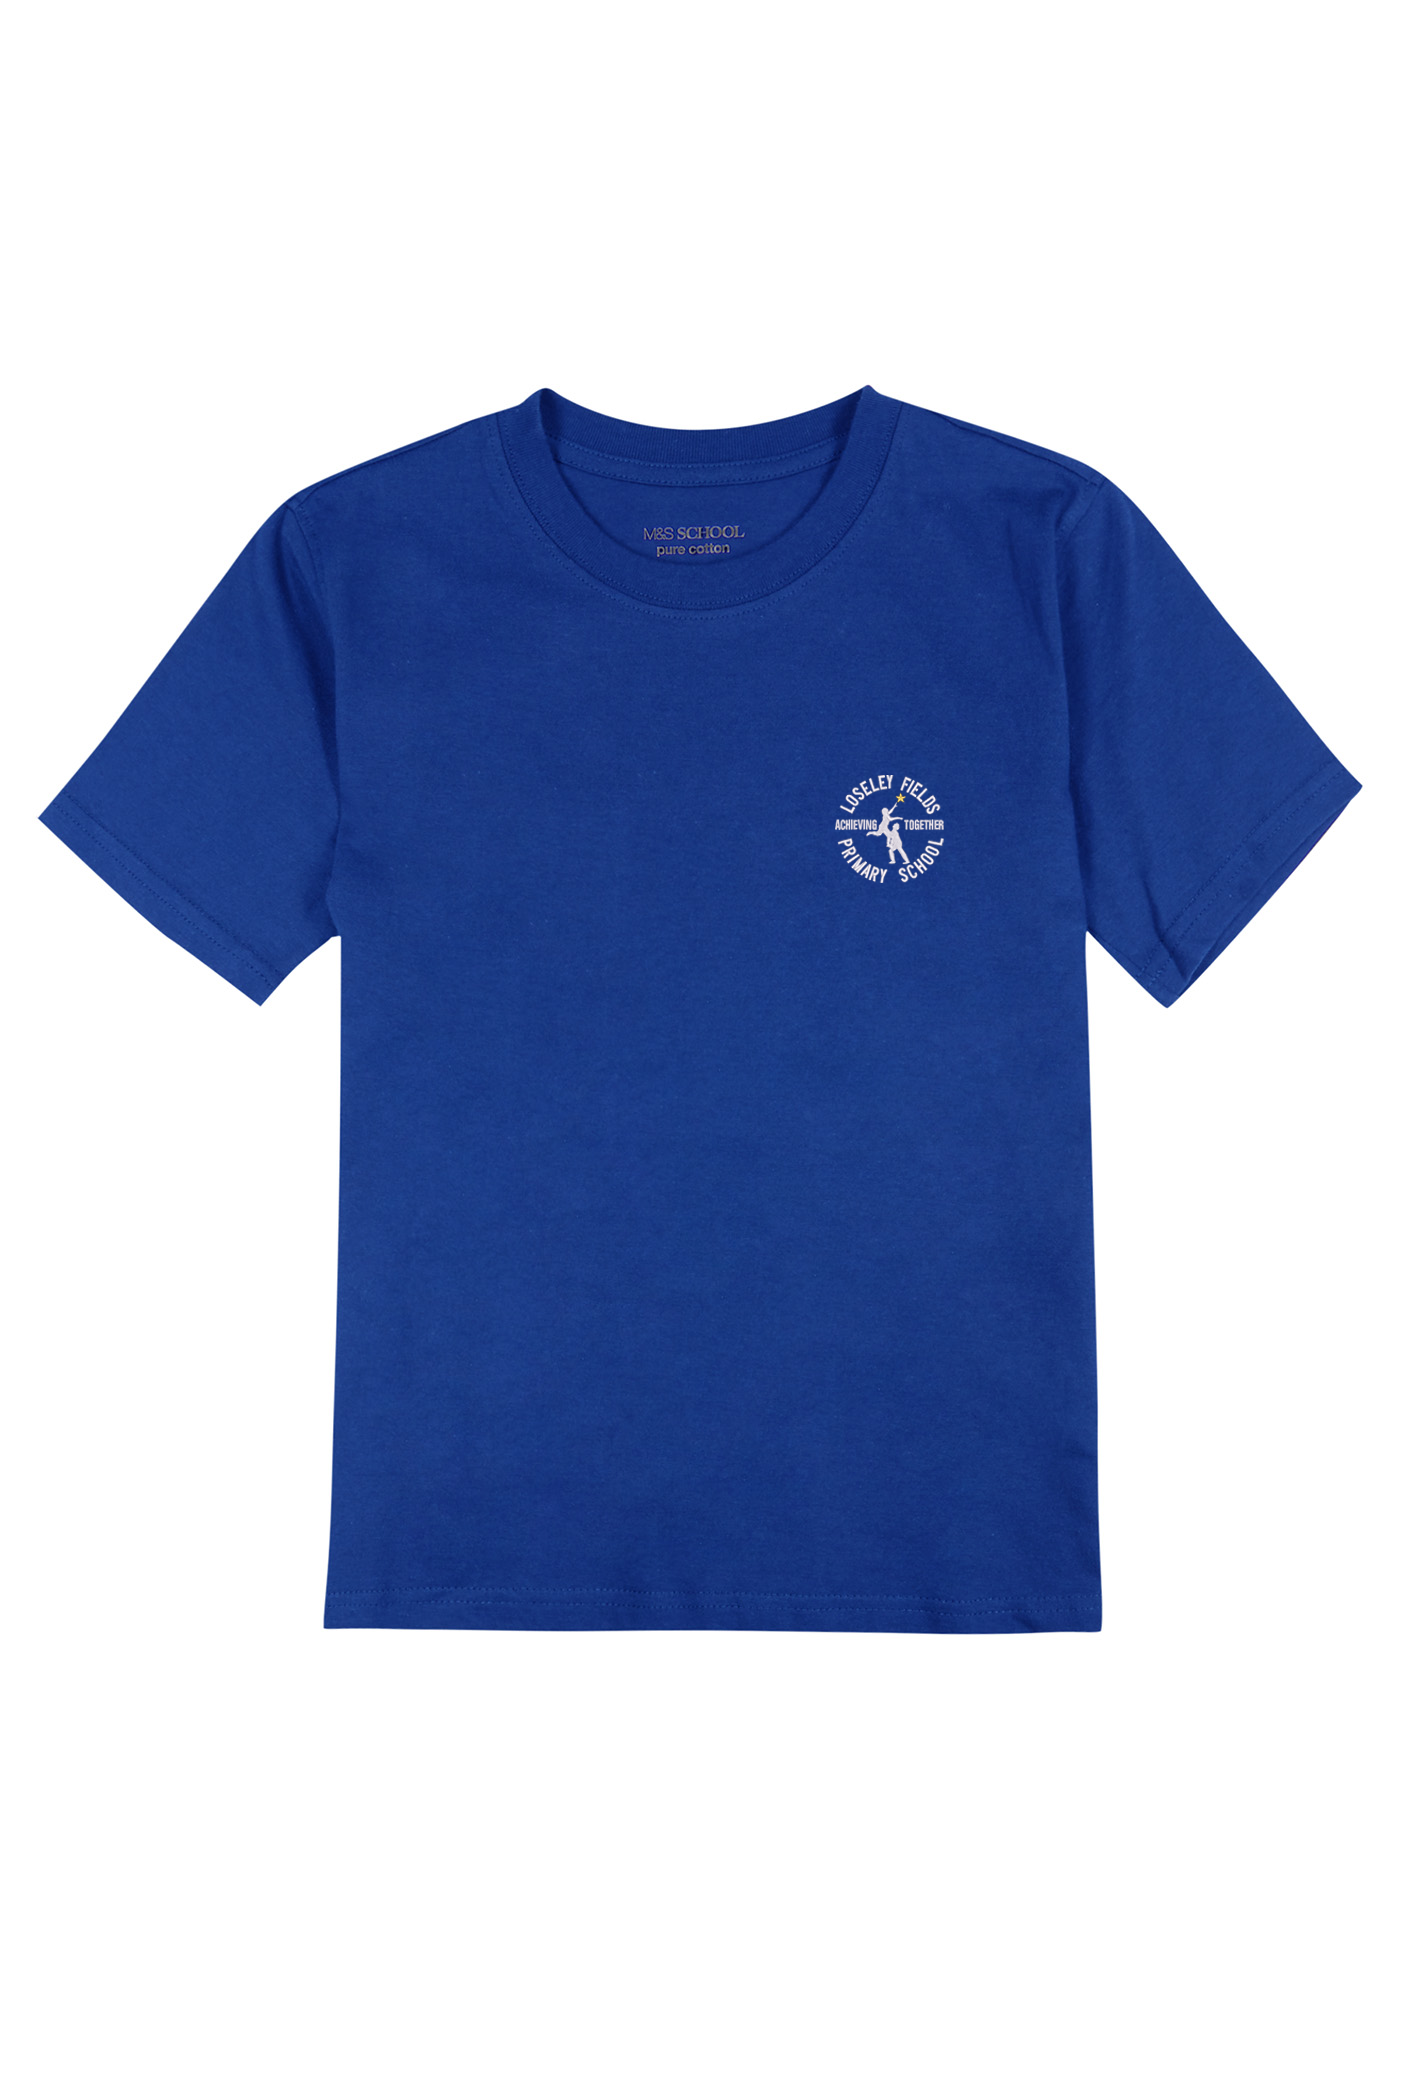 Loseley Fields Primary School Embroidered Royal Blue T-Shirt